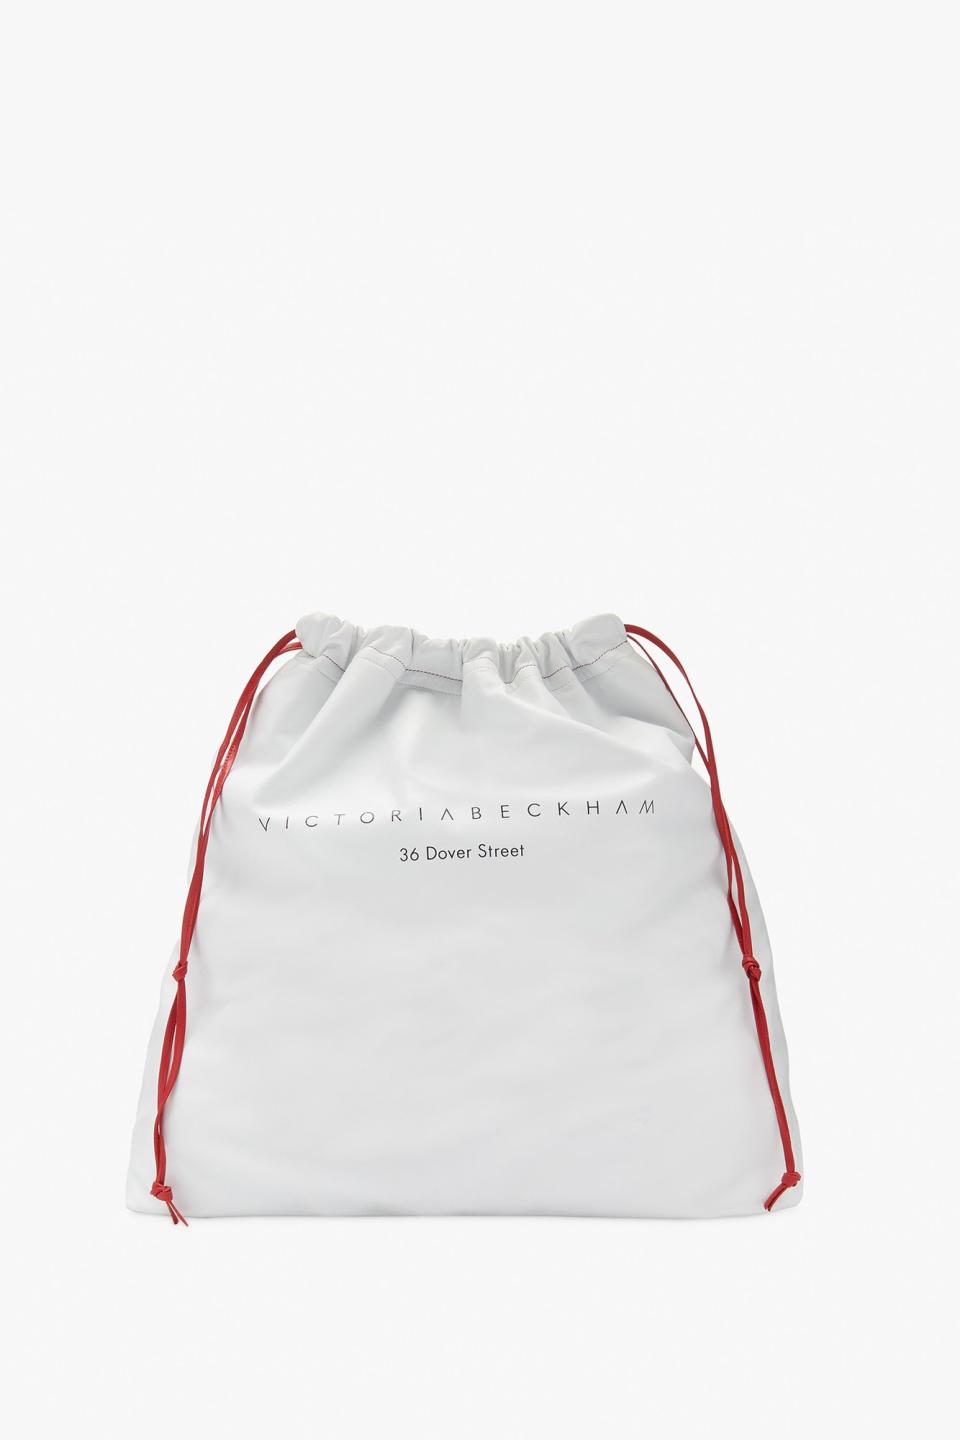 The 36 Dover St Drawstring Bag costs £795. [Photo: Victoria Beckham] 